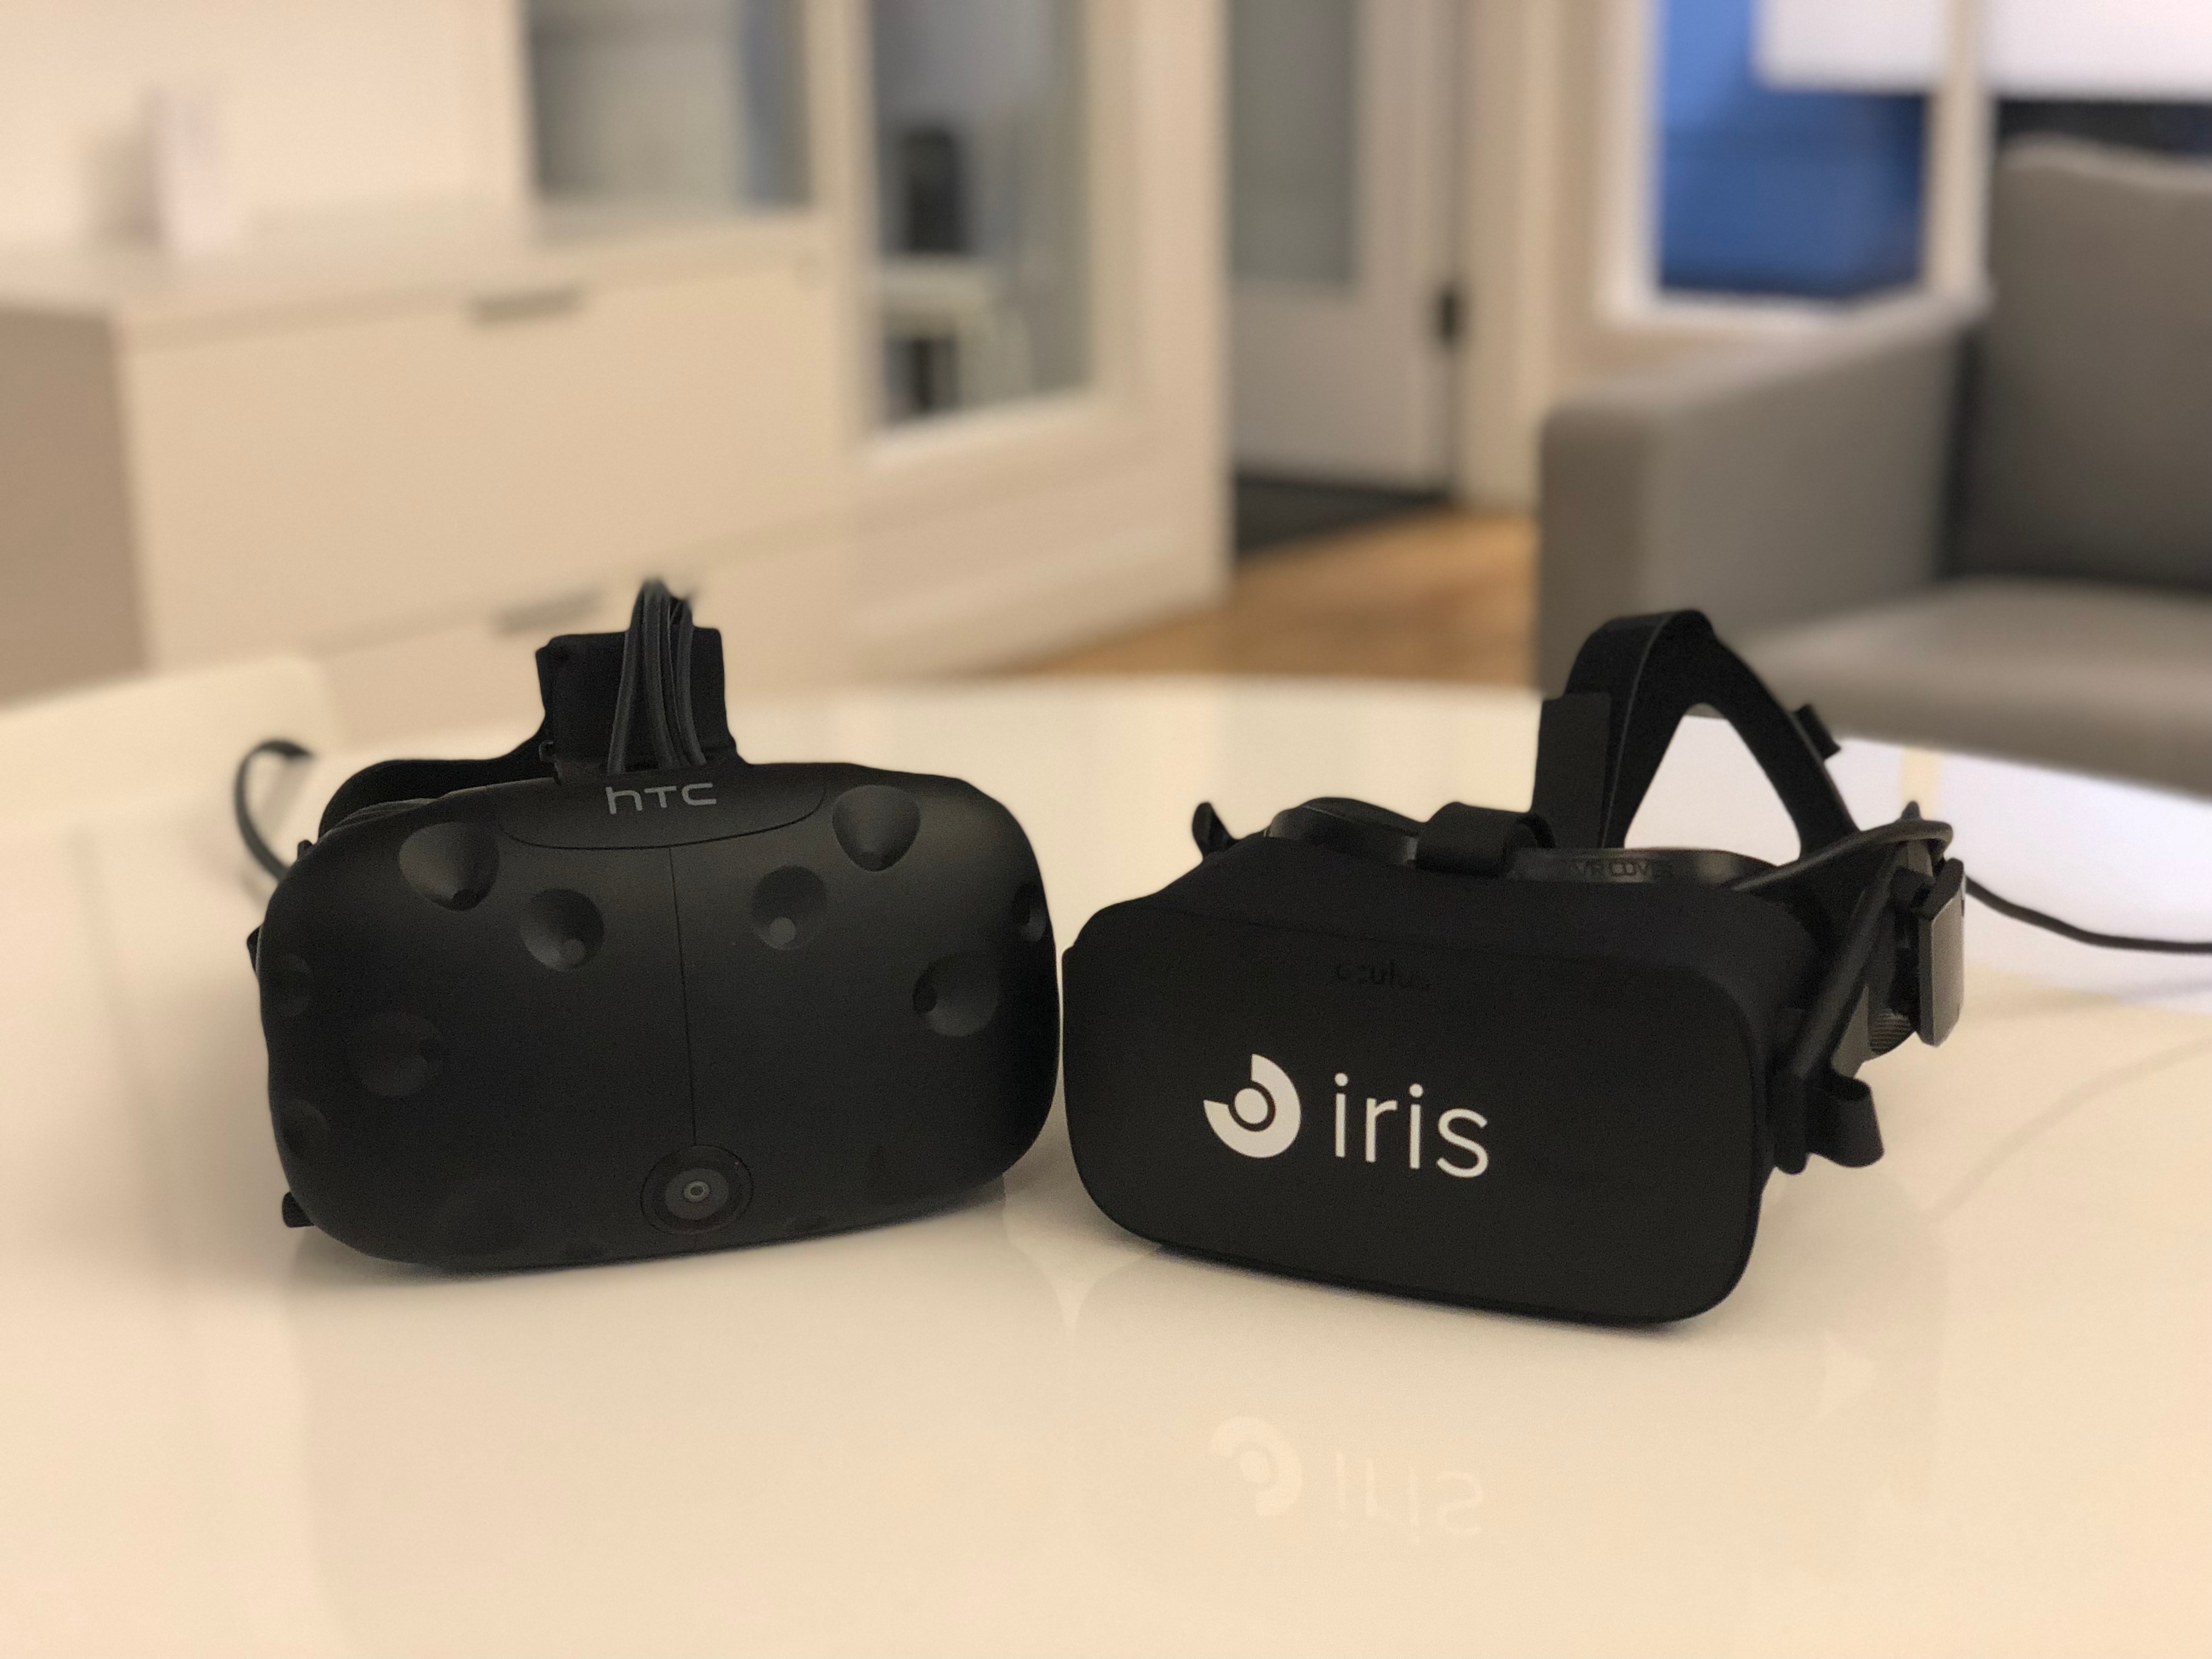 HTC Vive and Oculus Rift